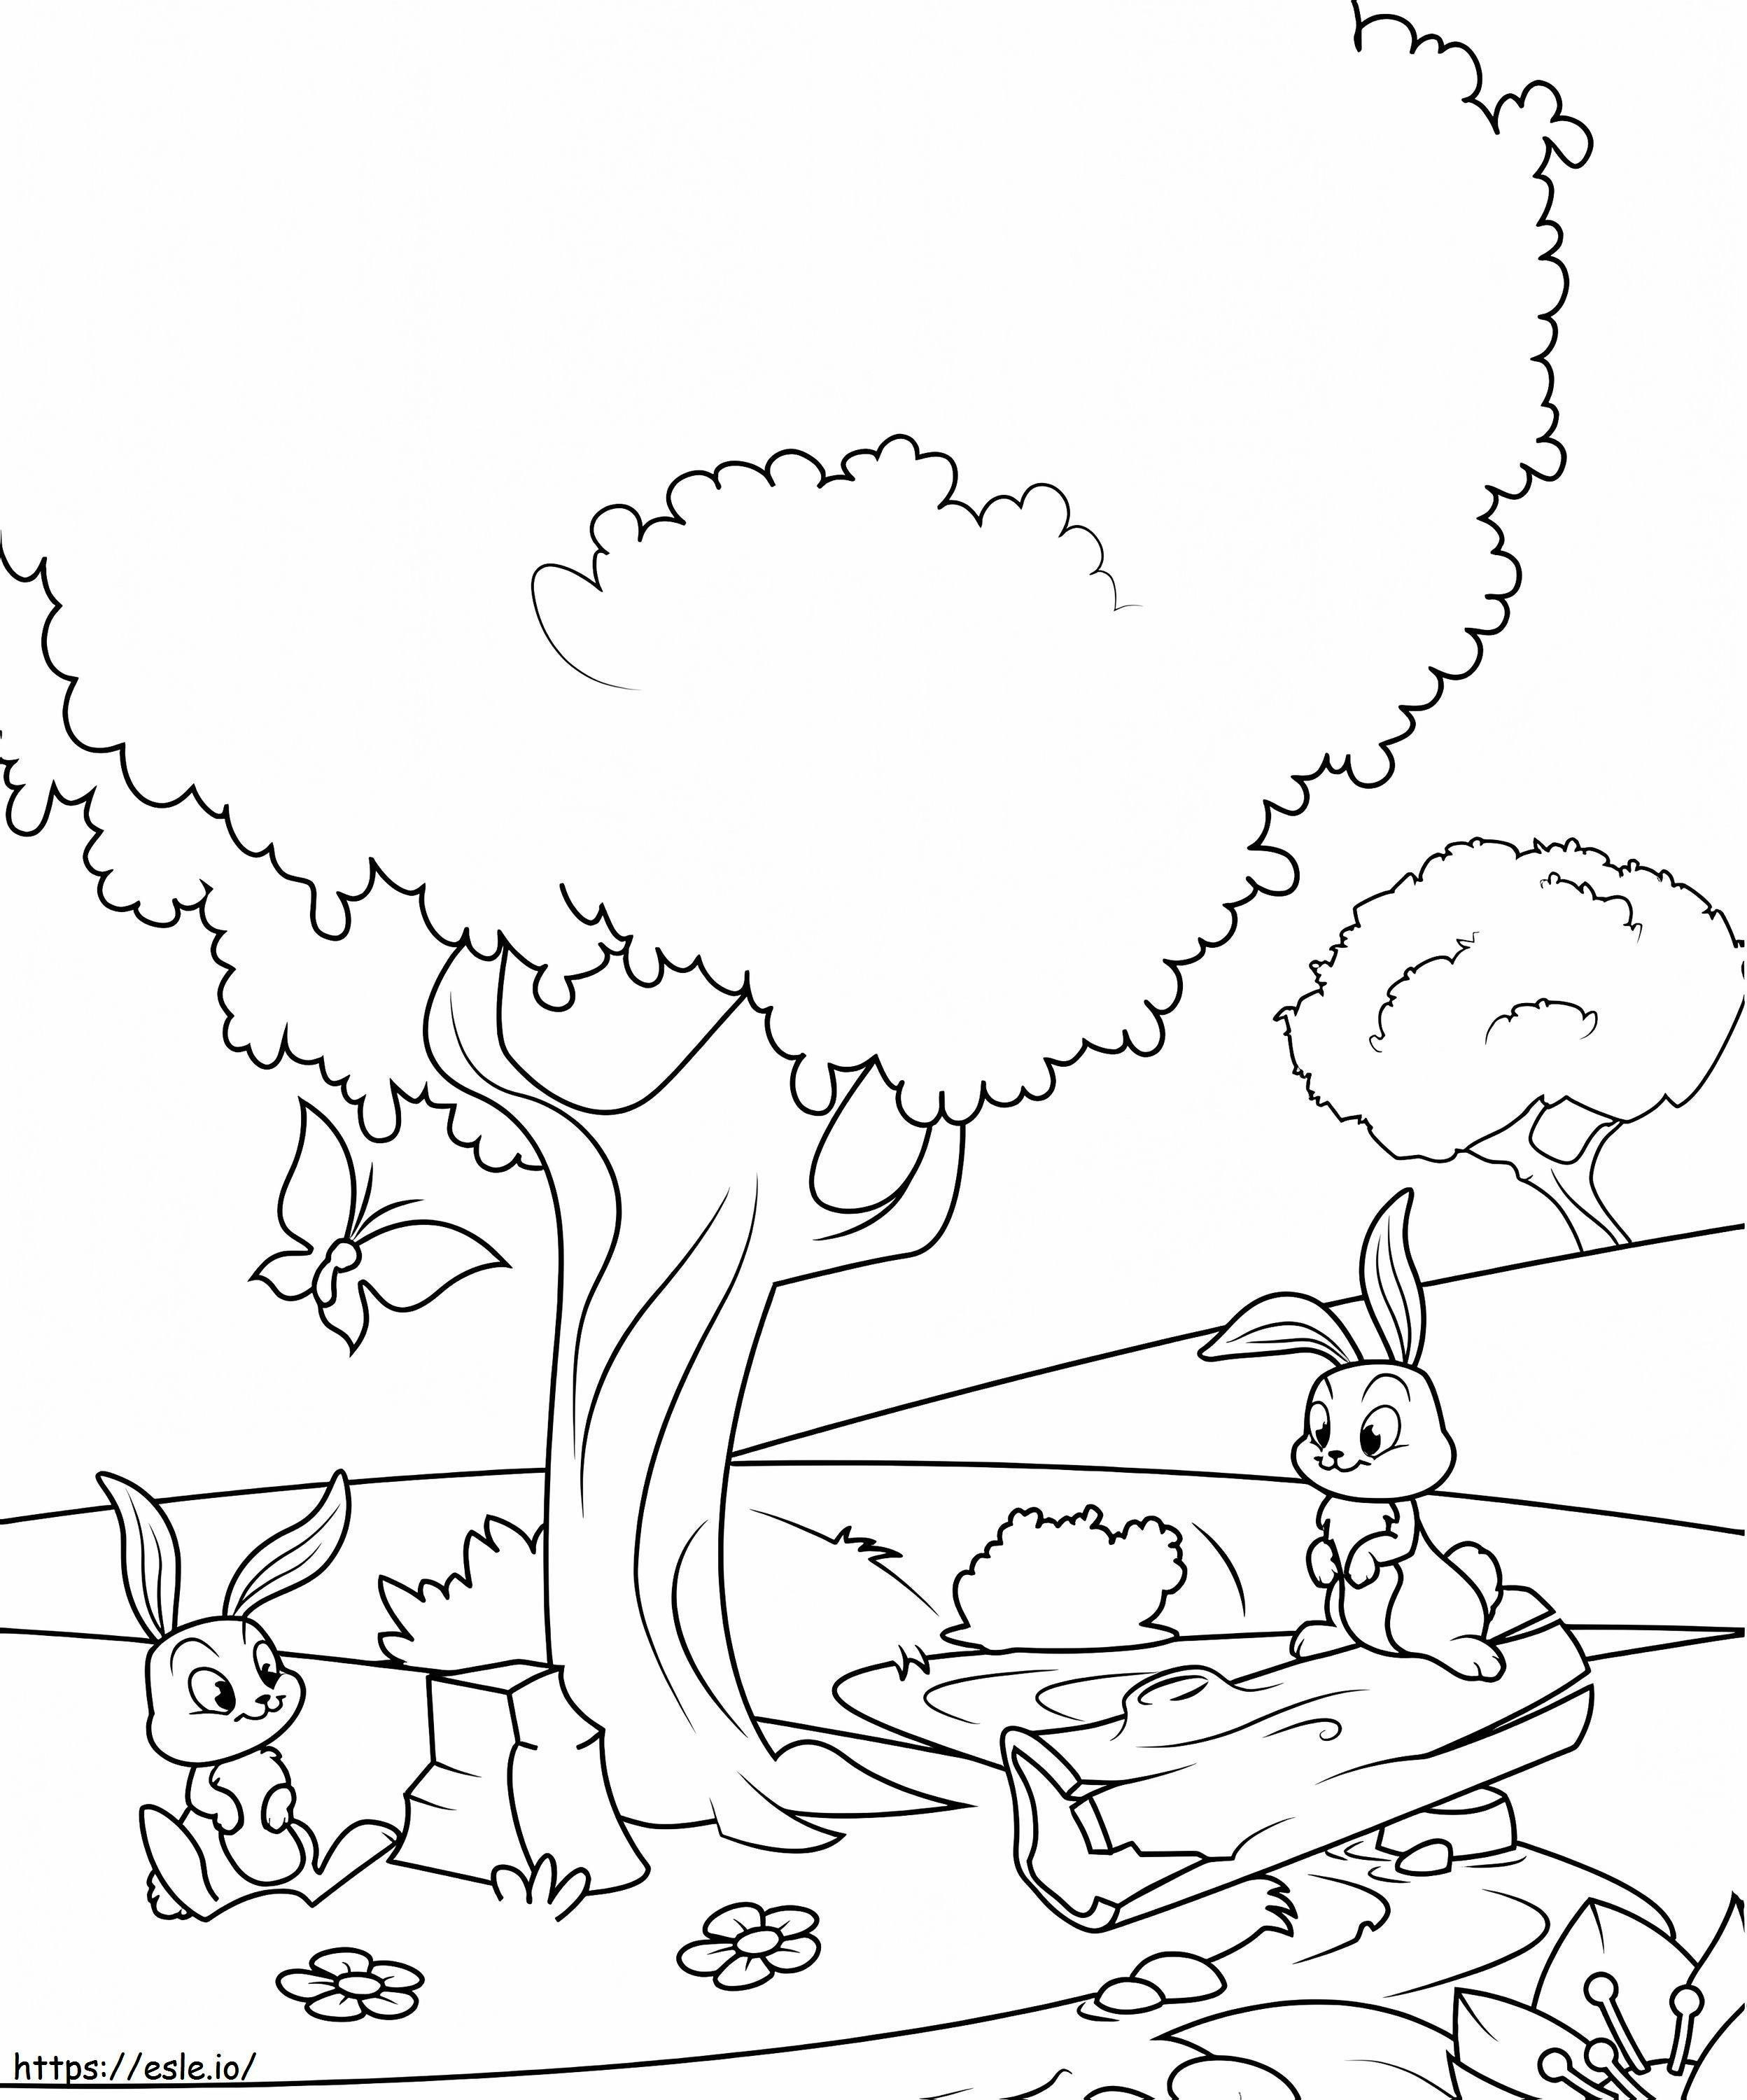 Rabbits Under The Tree coloring page